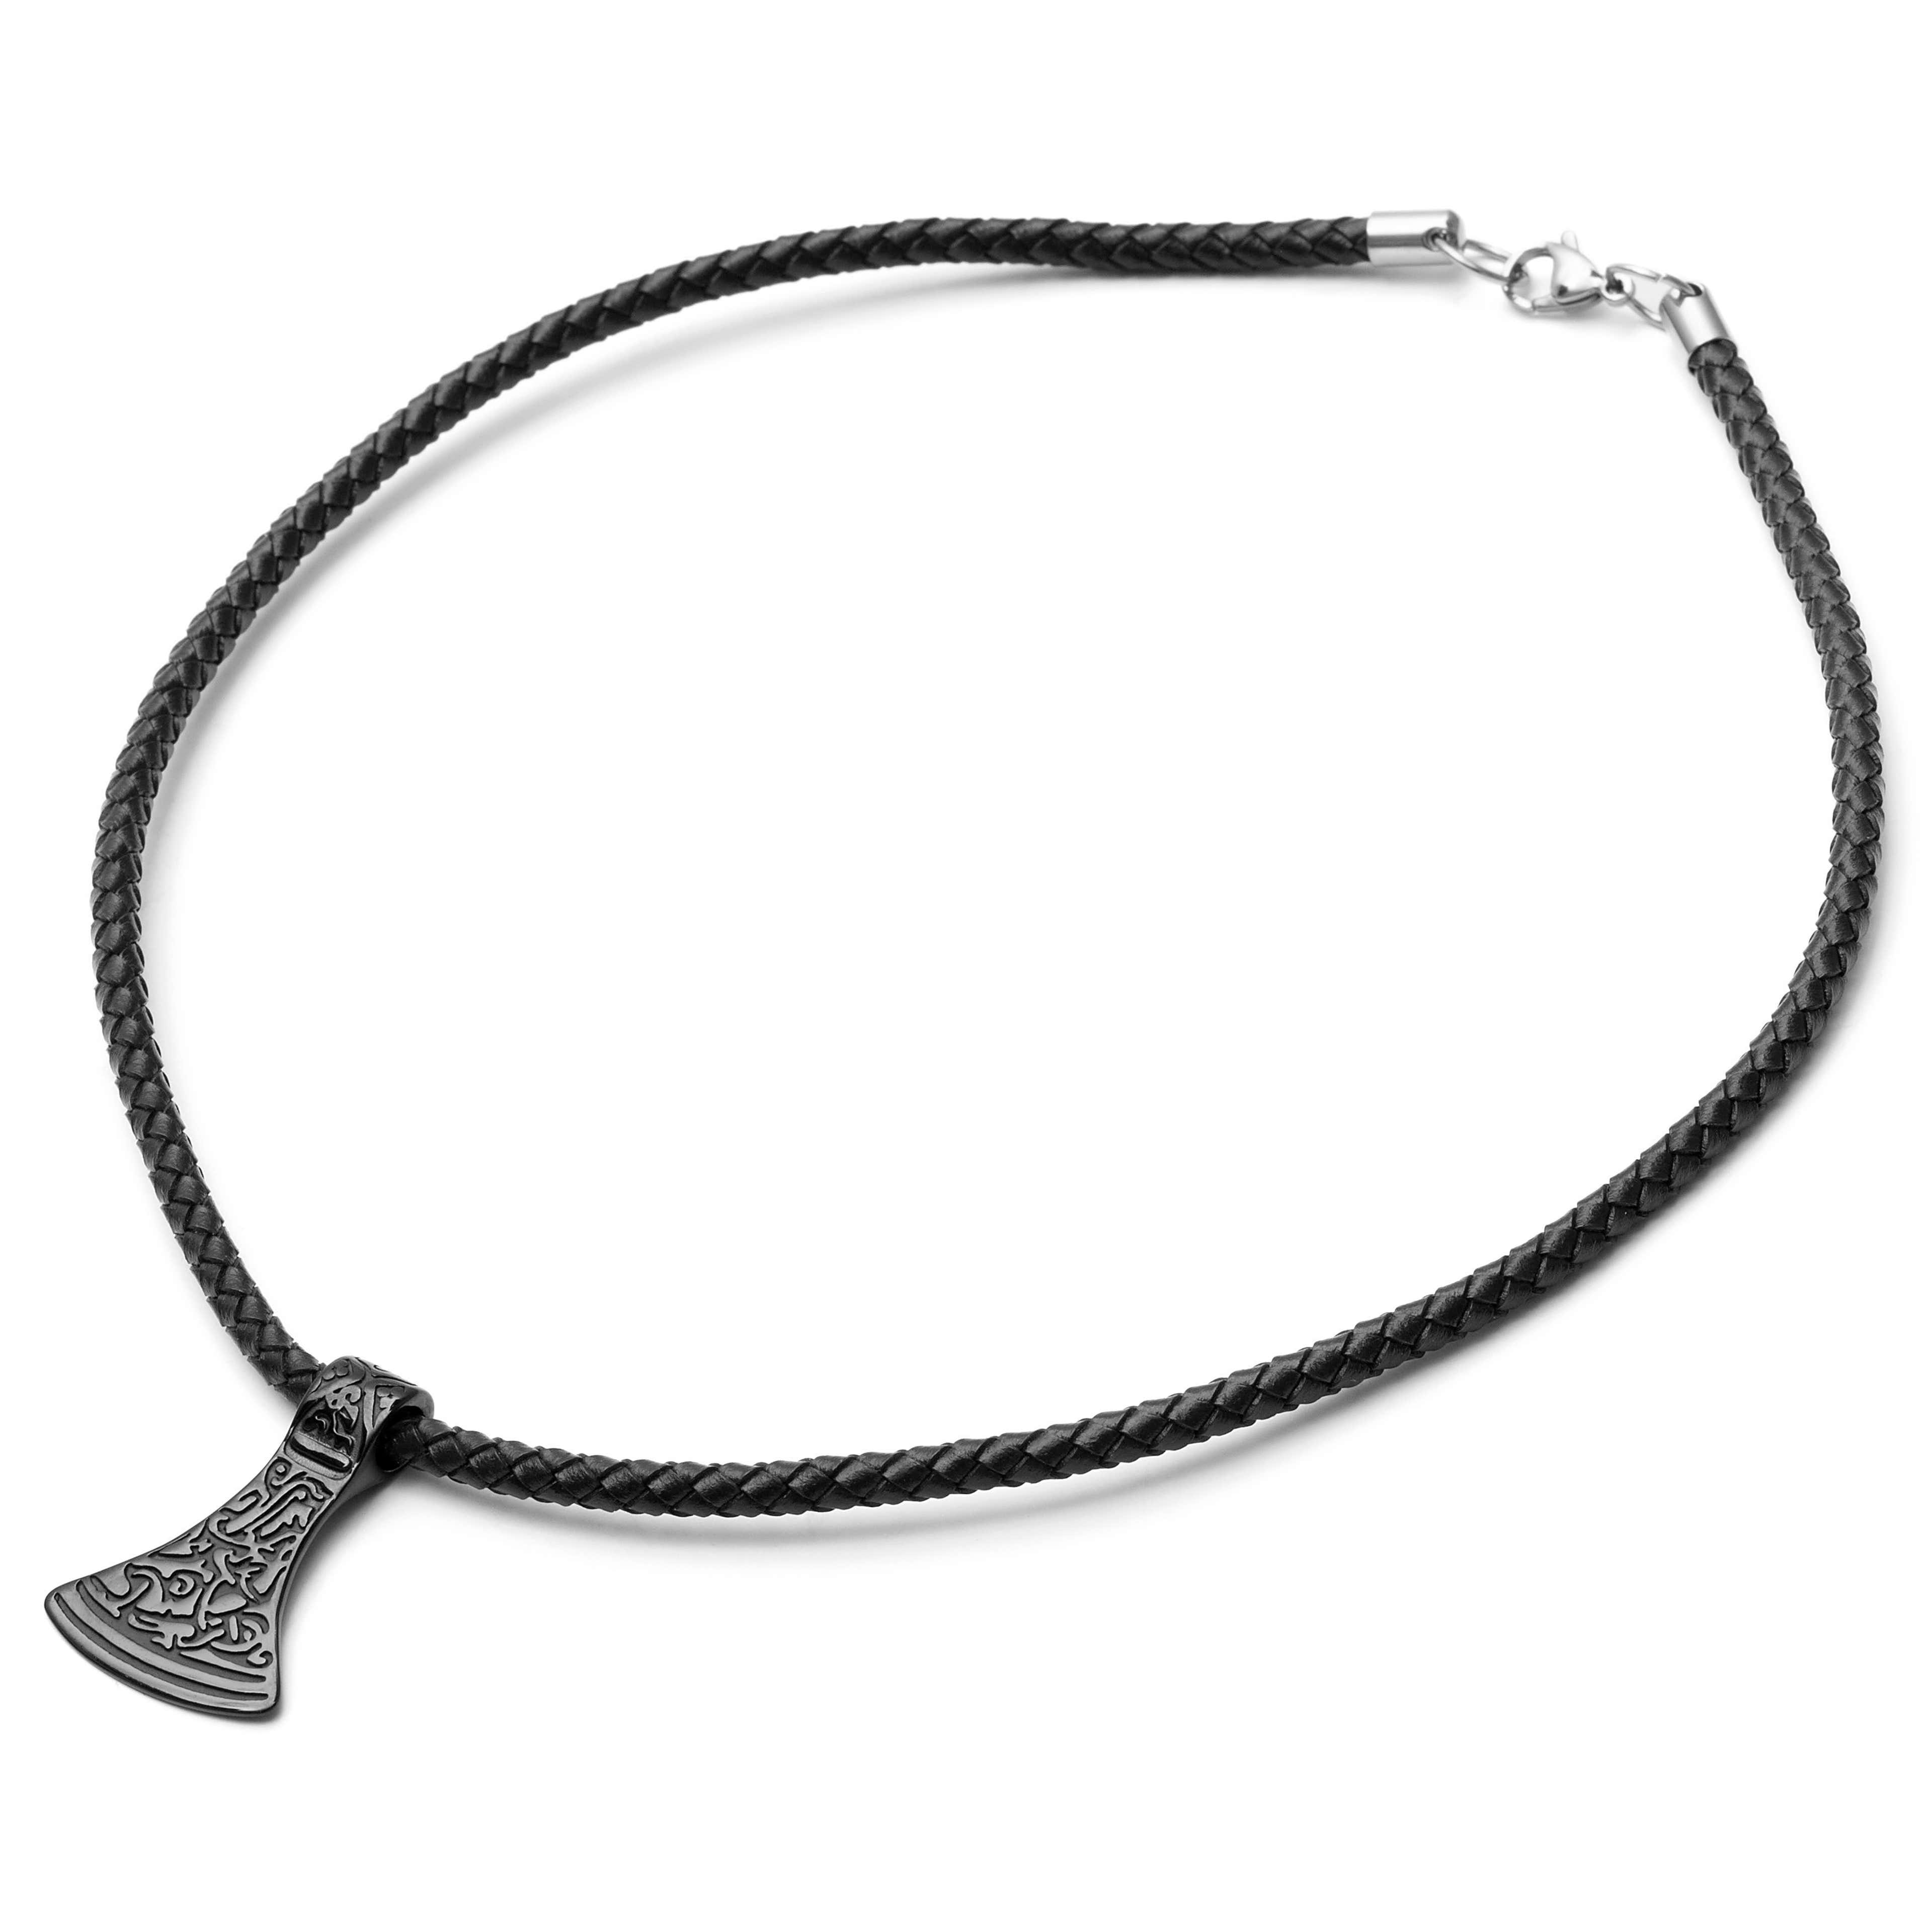 Rune Thor’s Axe Black Leather Necklace - 7 - gallery